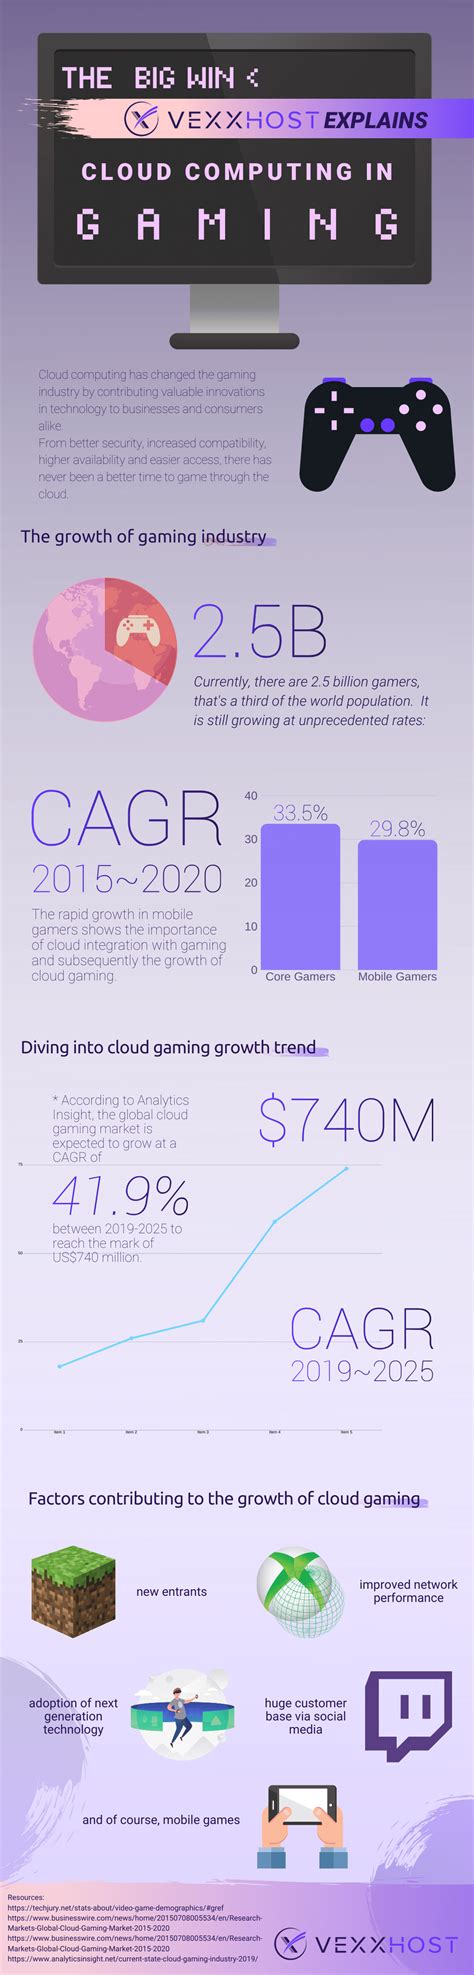 Cloud Computing In The Gaming Industry Visually